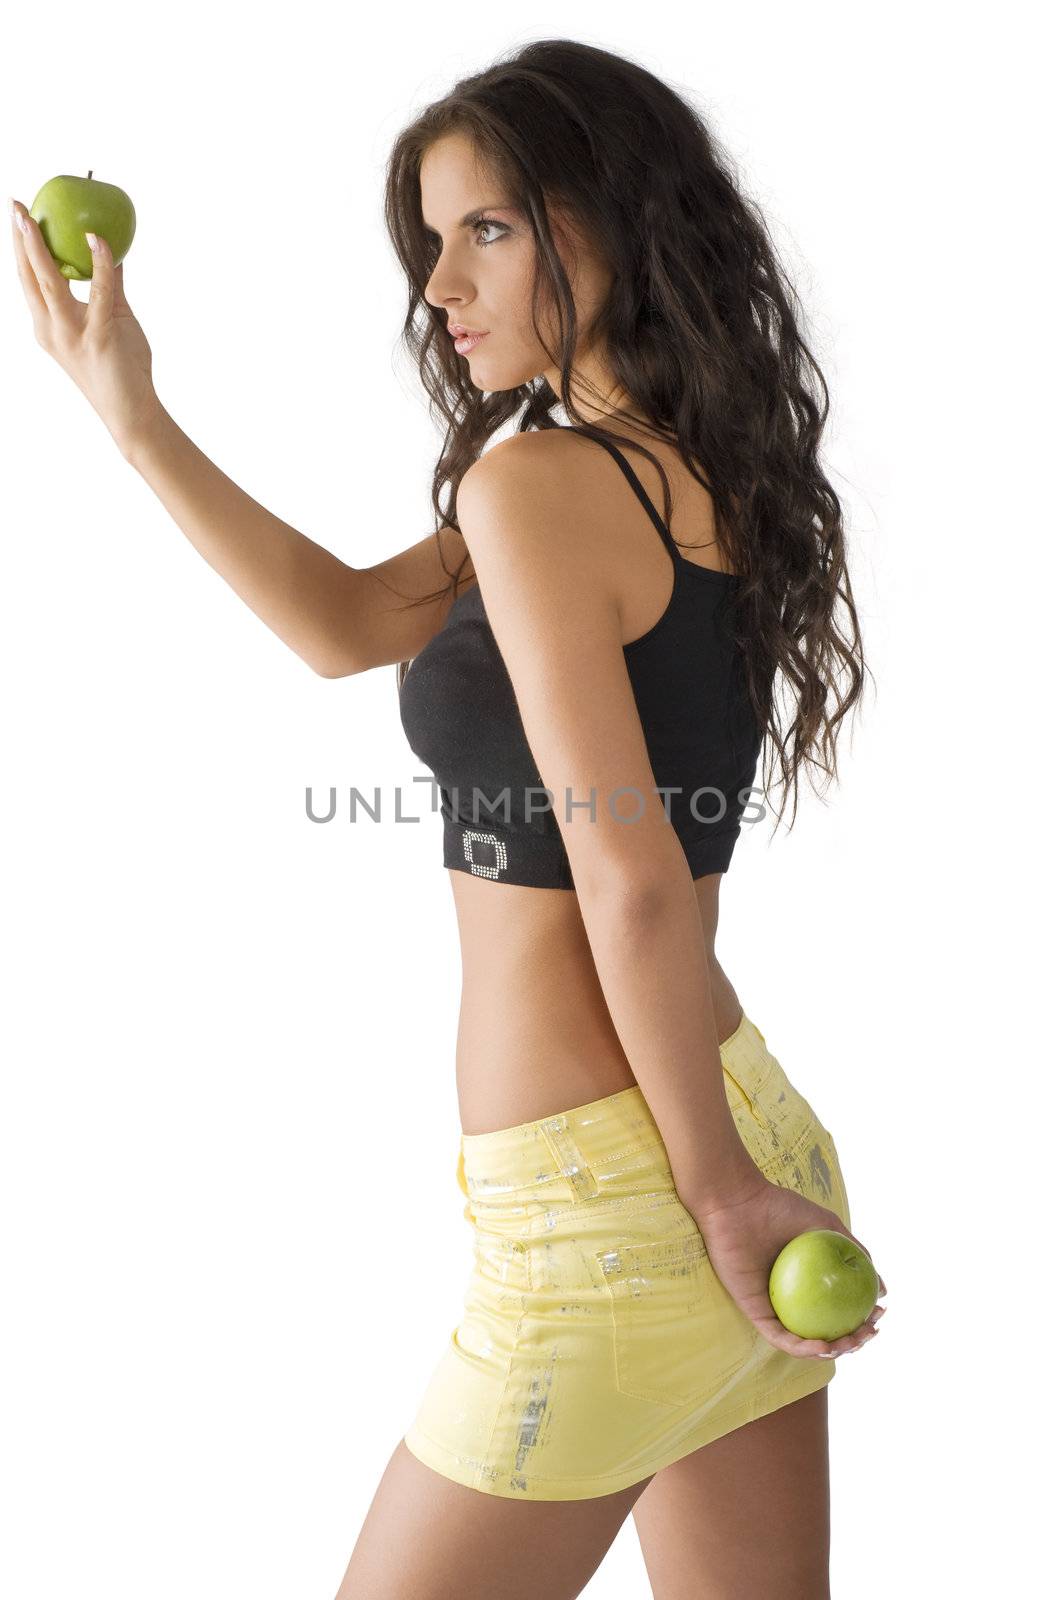 cute young brunette looking at a green apple with big interest